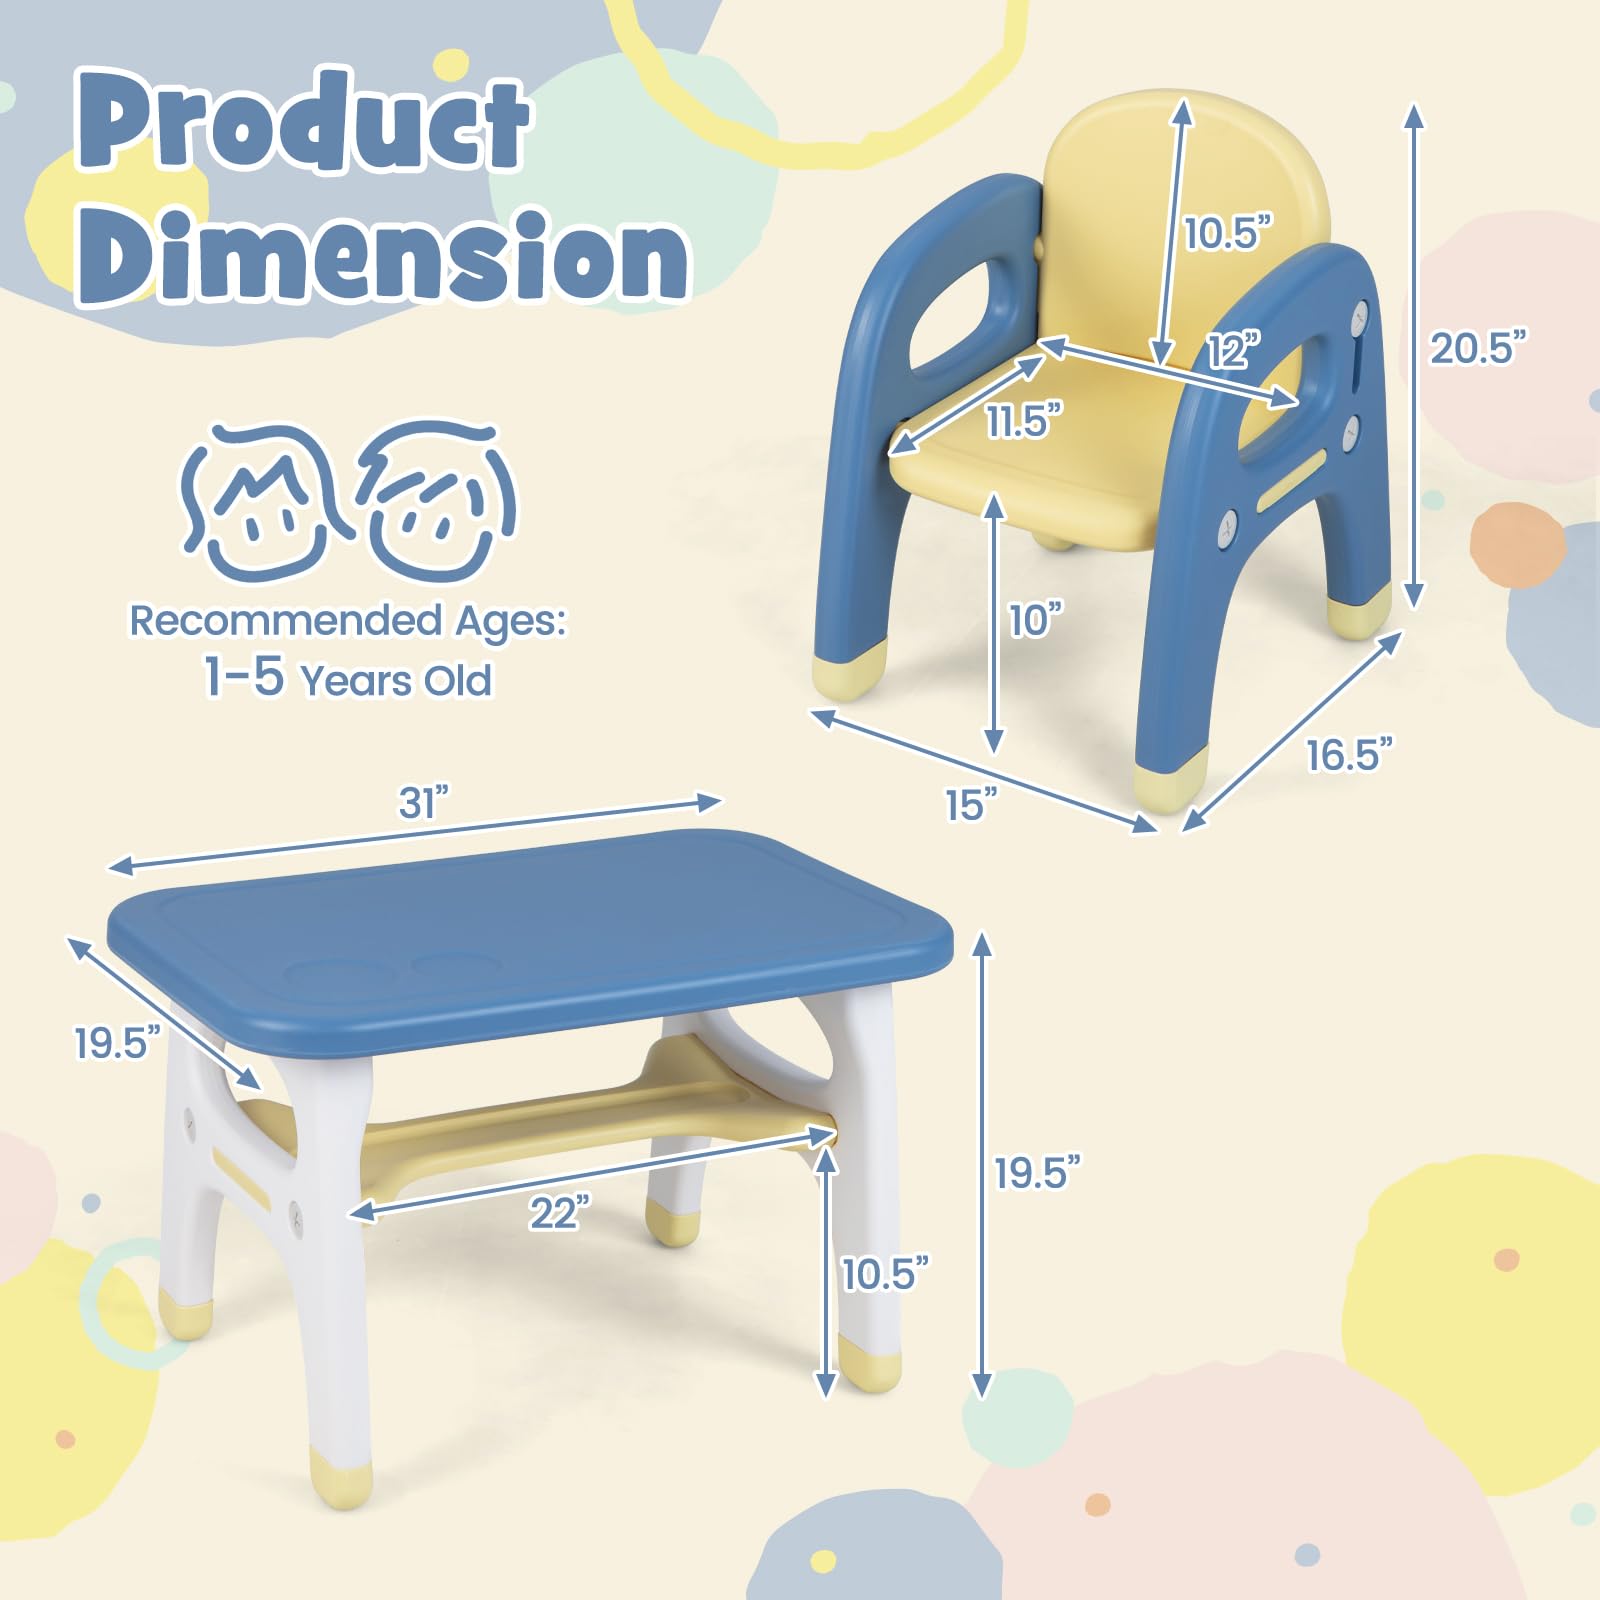 Costzon Kids Table and Chair Set w/Montessori Toys, Kids Activity Table w/Storage Shelf, Building Blocks, Cute Dinosaur Shape Chair, Easy to Clean, Preschool, Kindergarten (Table and 2 Chairs)